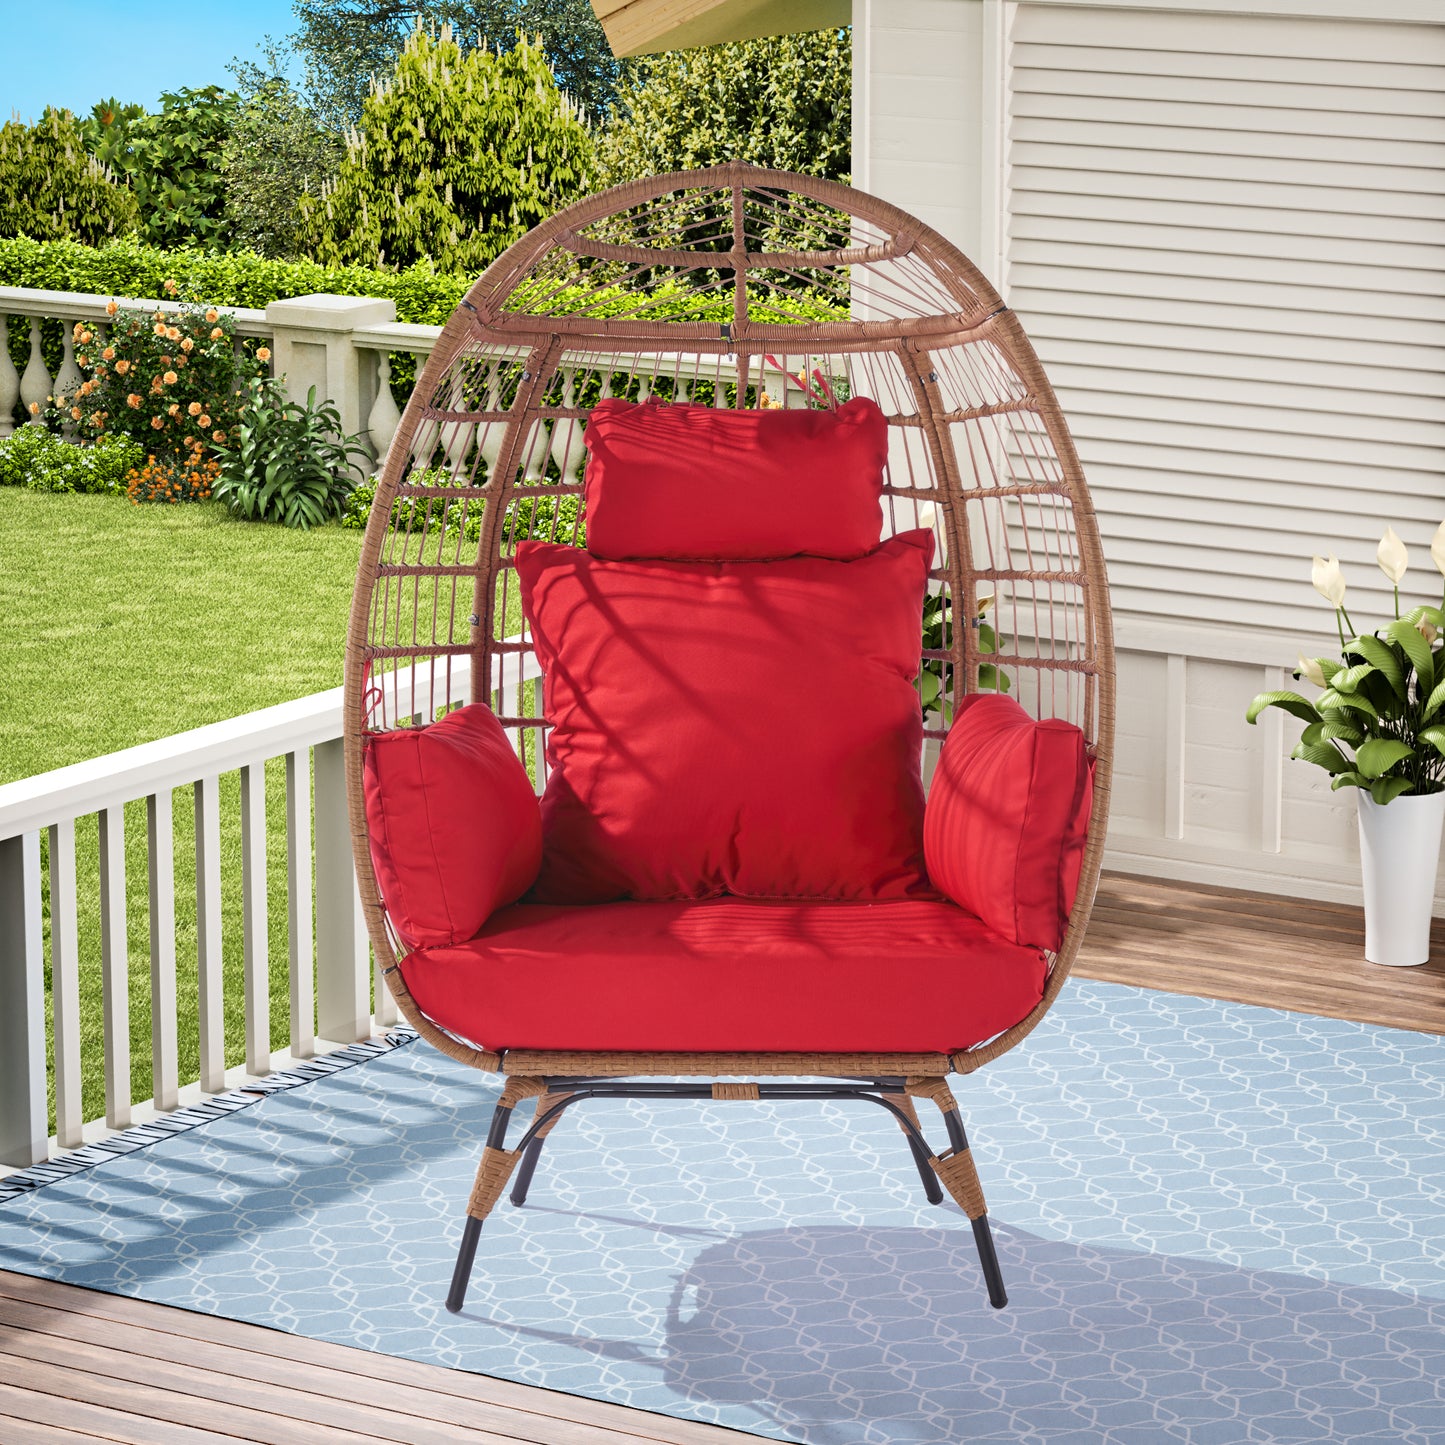 Wicker Egg Chair, Oversized Indoor Outdoor Lounger for Patio, Backyard, Living Room w/ 5 Cushions, Steel Frame, 440lb Capacity - Red